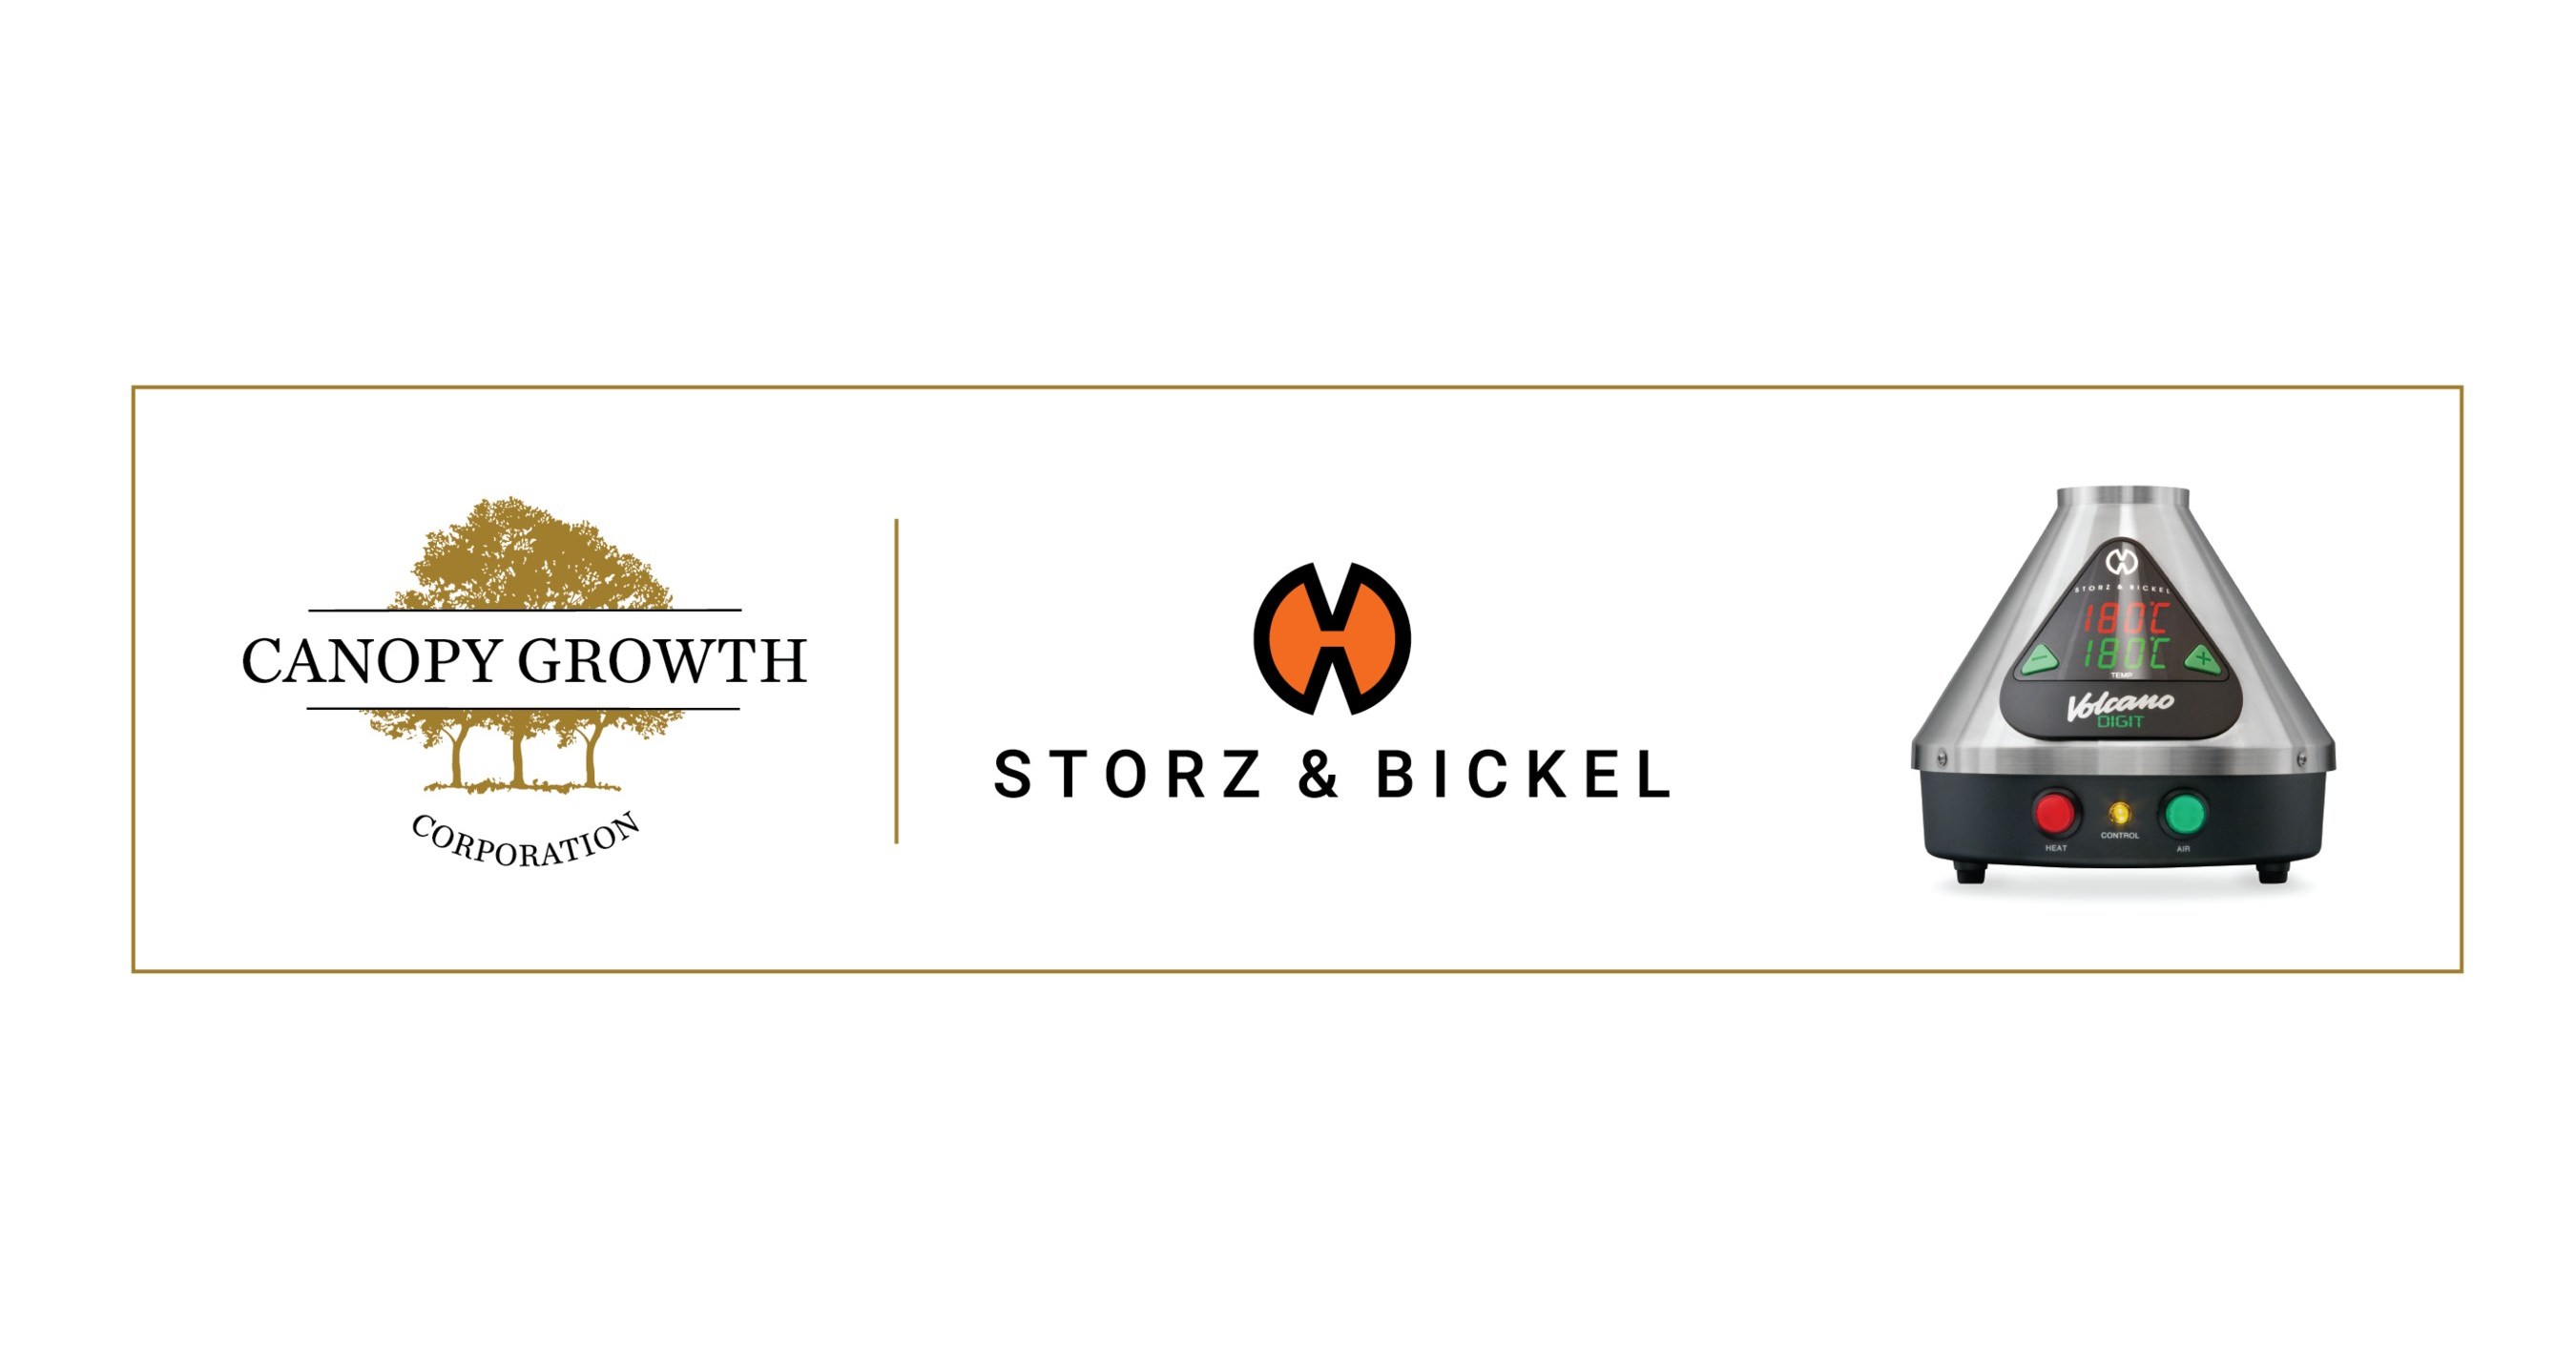 Canopy Growth Acquires Storz & Bickel